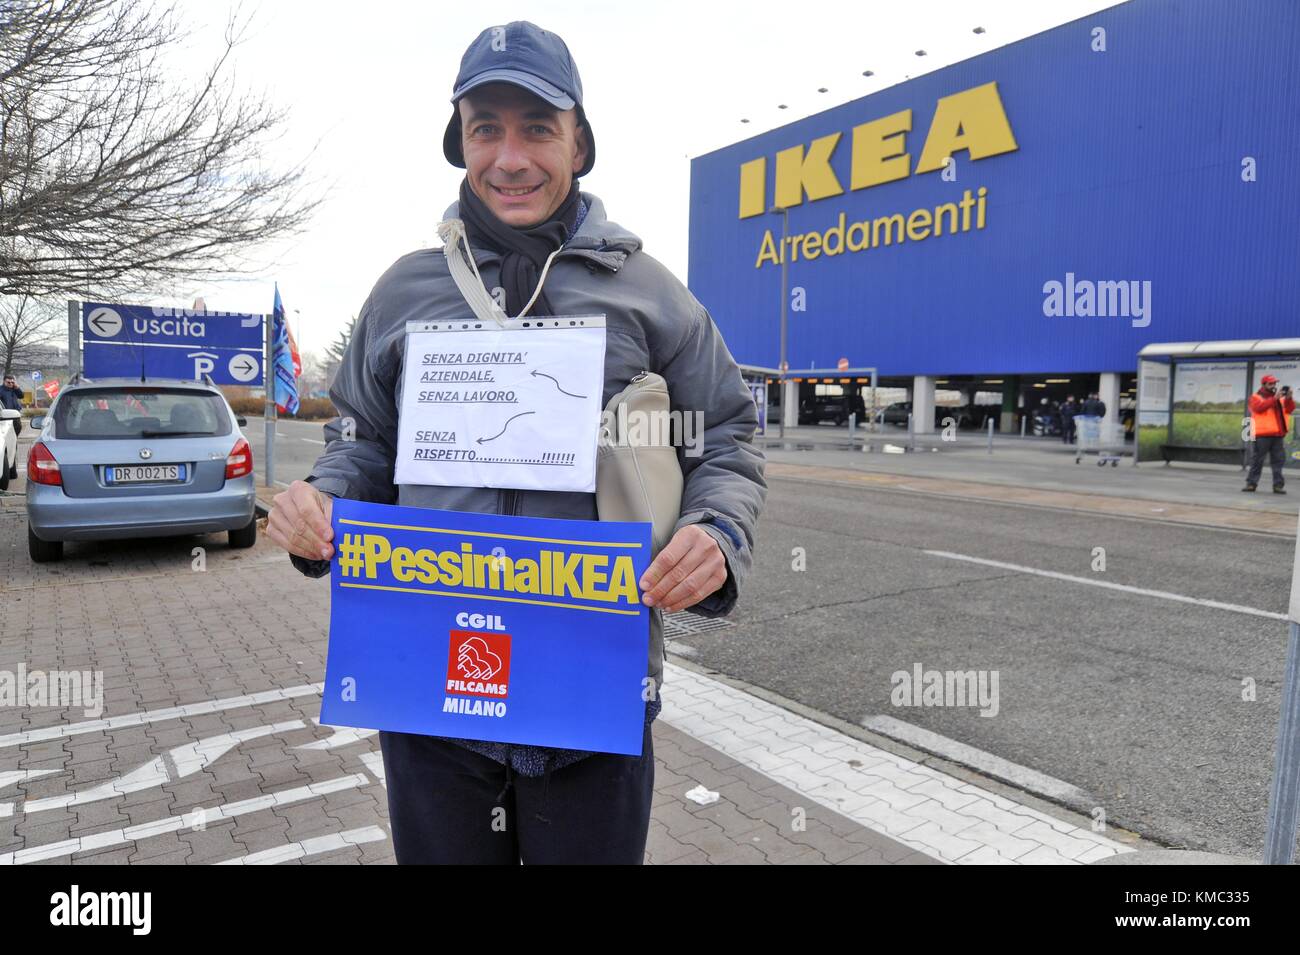 Protest by CGIL union to the IKEA in Corsico (East Milan perifery, Italy)  against unjustified dismissals Stock Photo - Alamy